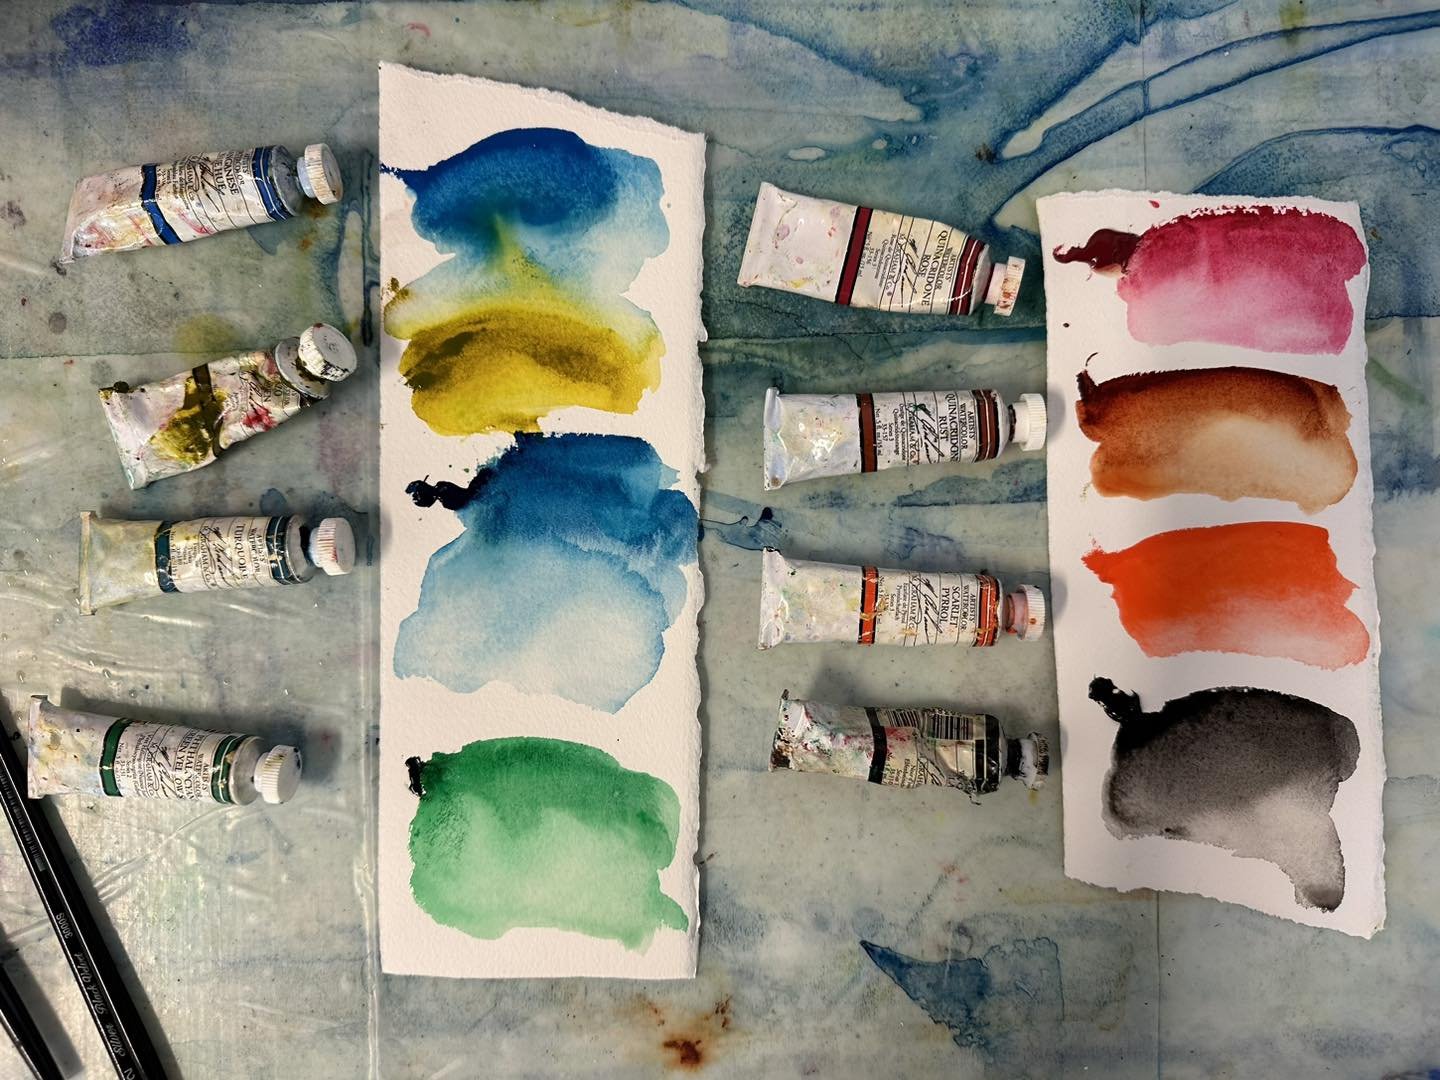 Trying out M. Graham watercolor pigments this week.